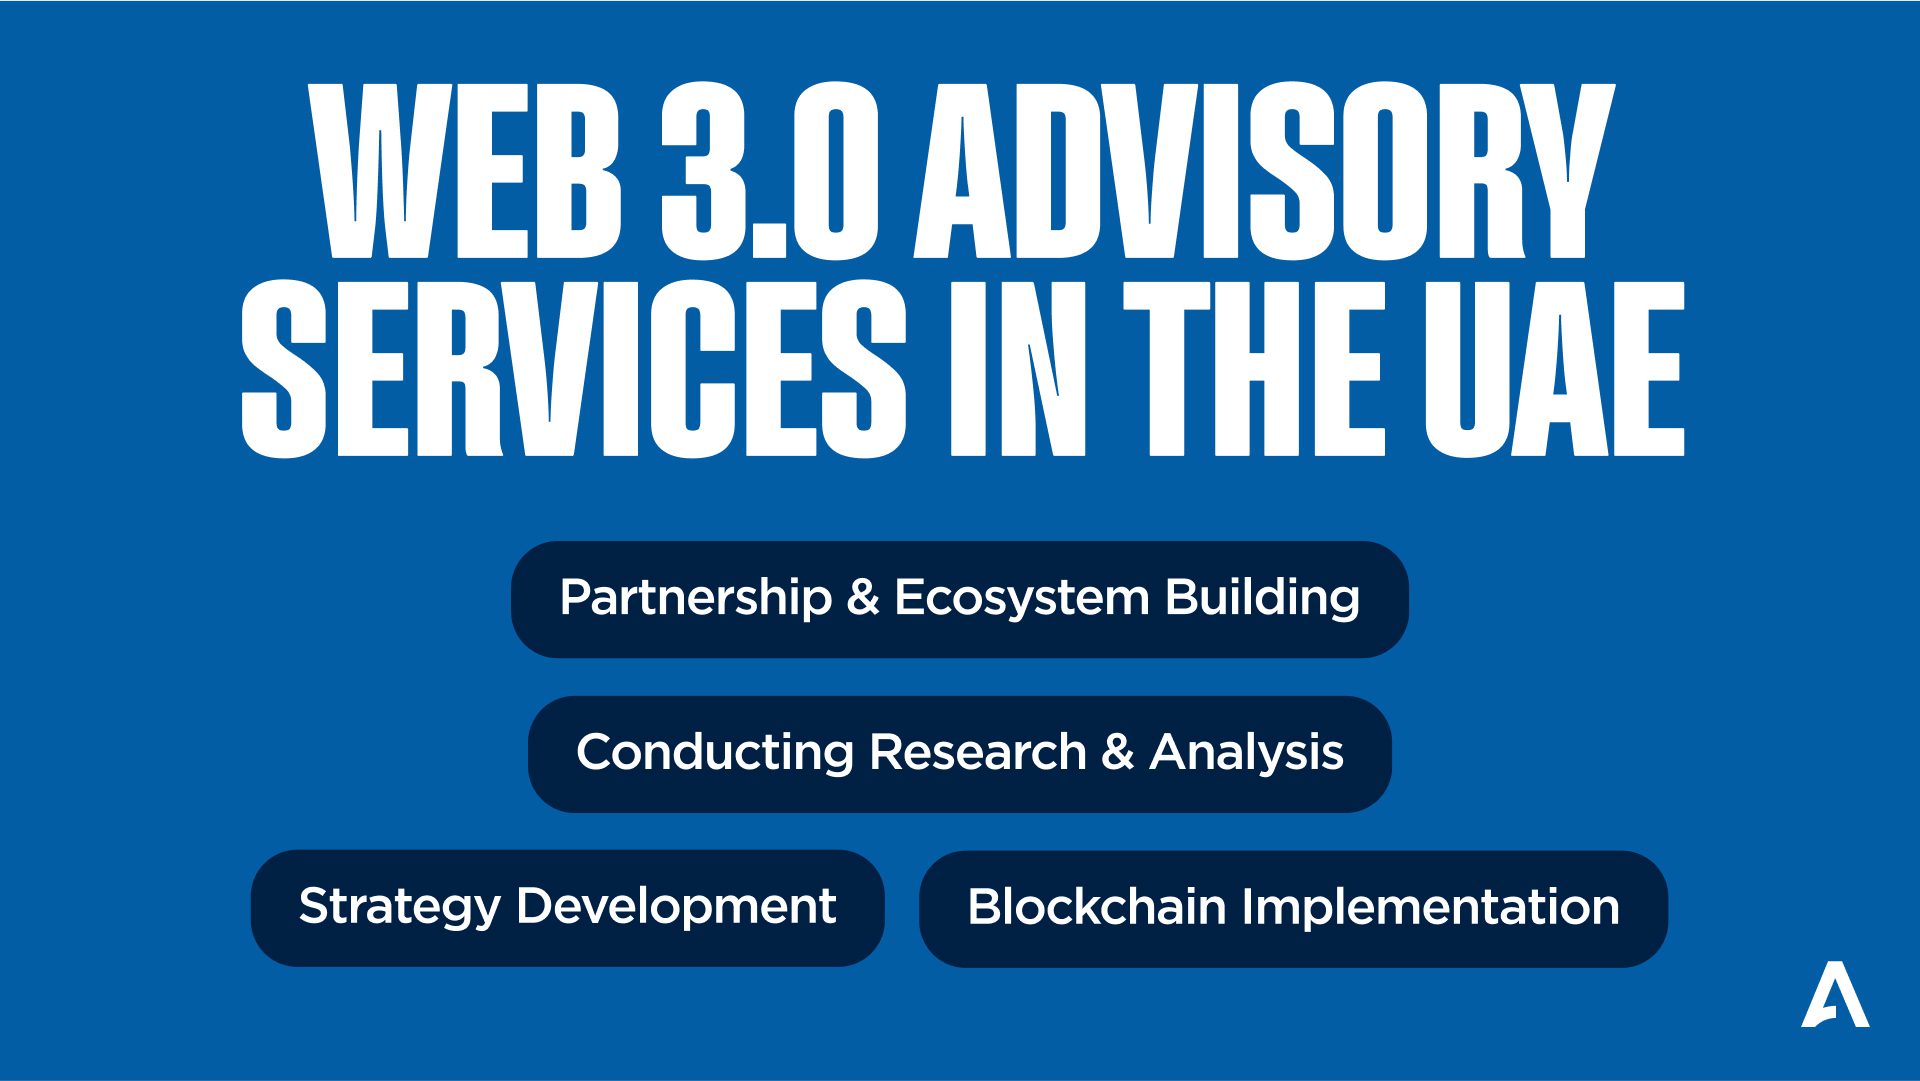 Web 3.0 Advisory services in the UAE